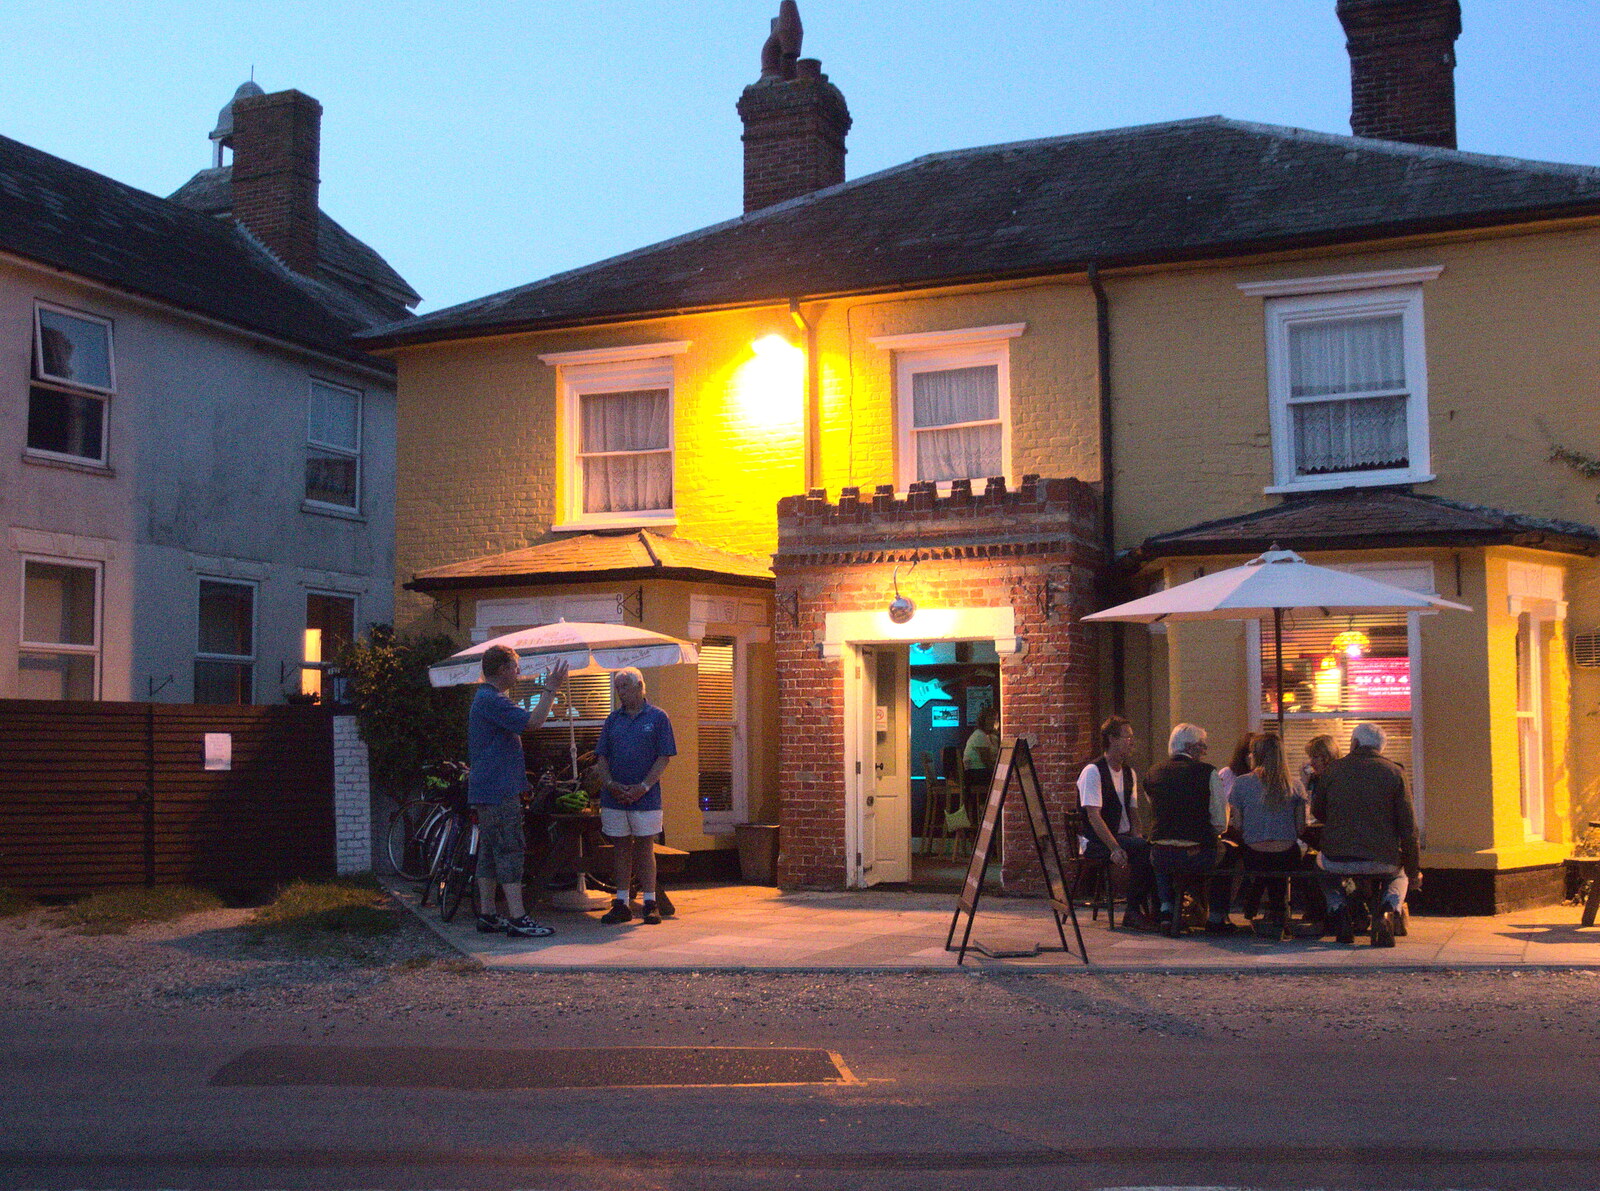 The Mellis Railway Tavern from Bike Rides and the BSCC at the Railway, Mellis and Brome, Suffolk - 18th September 2014